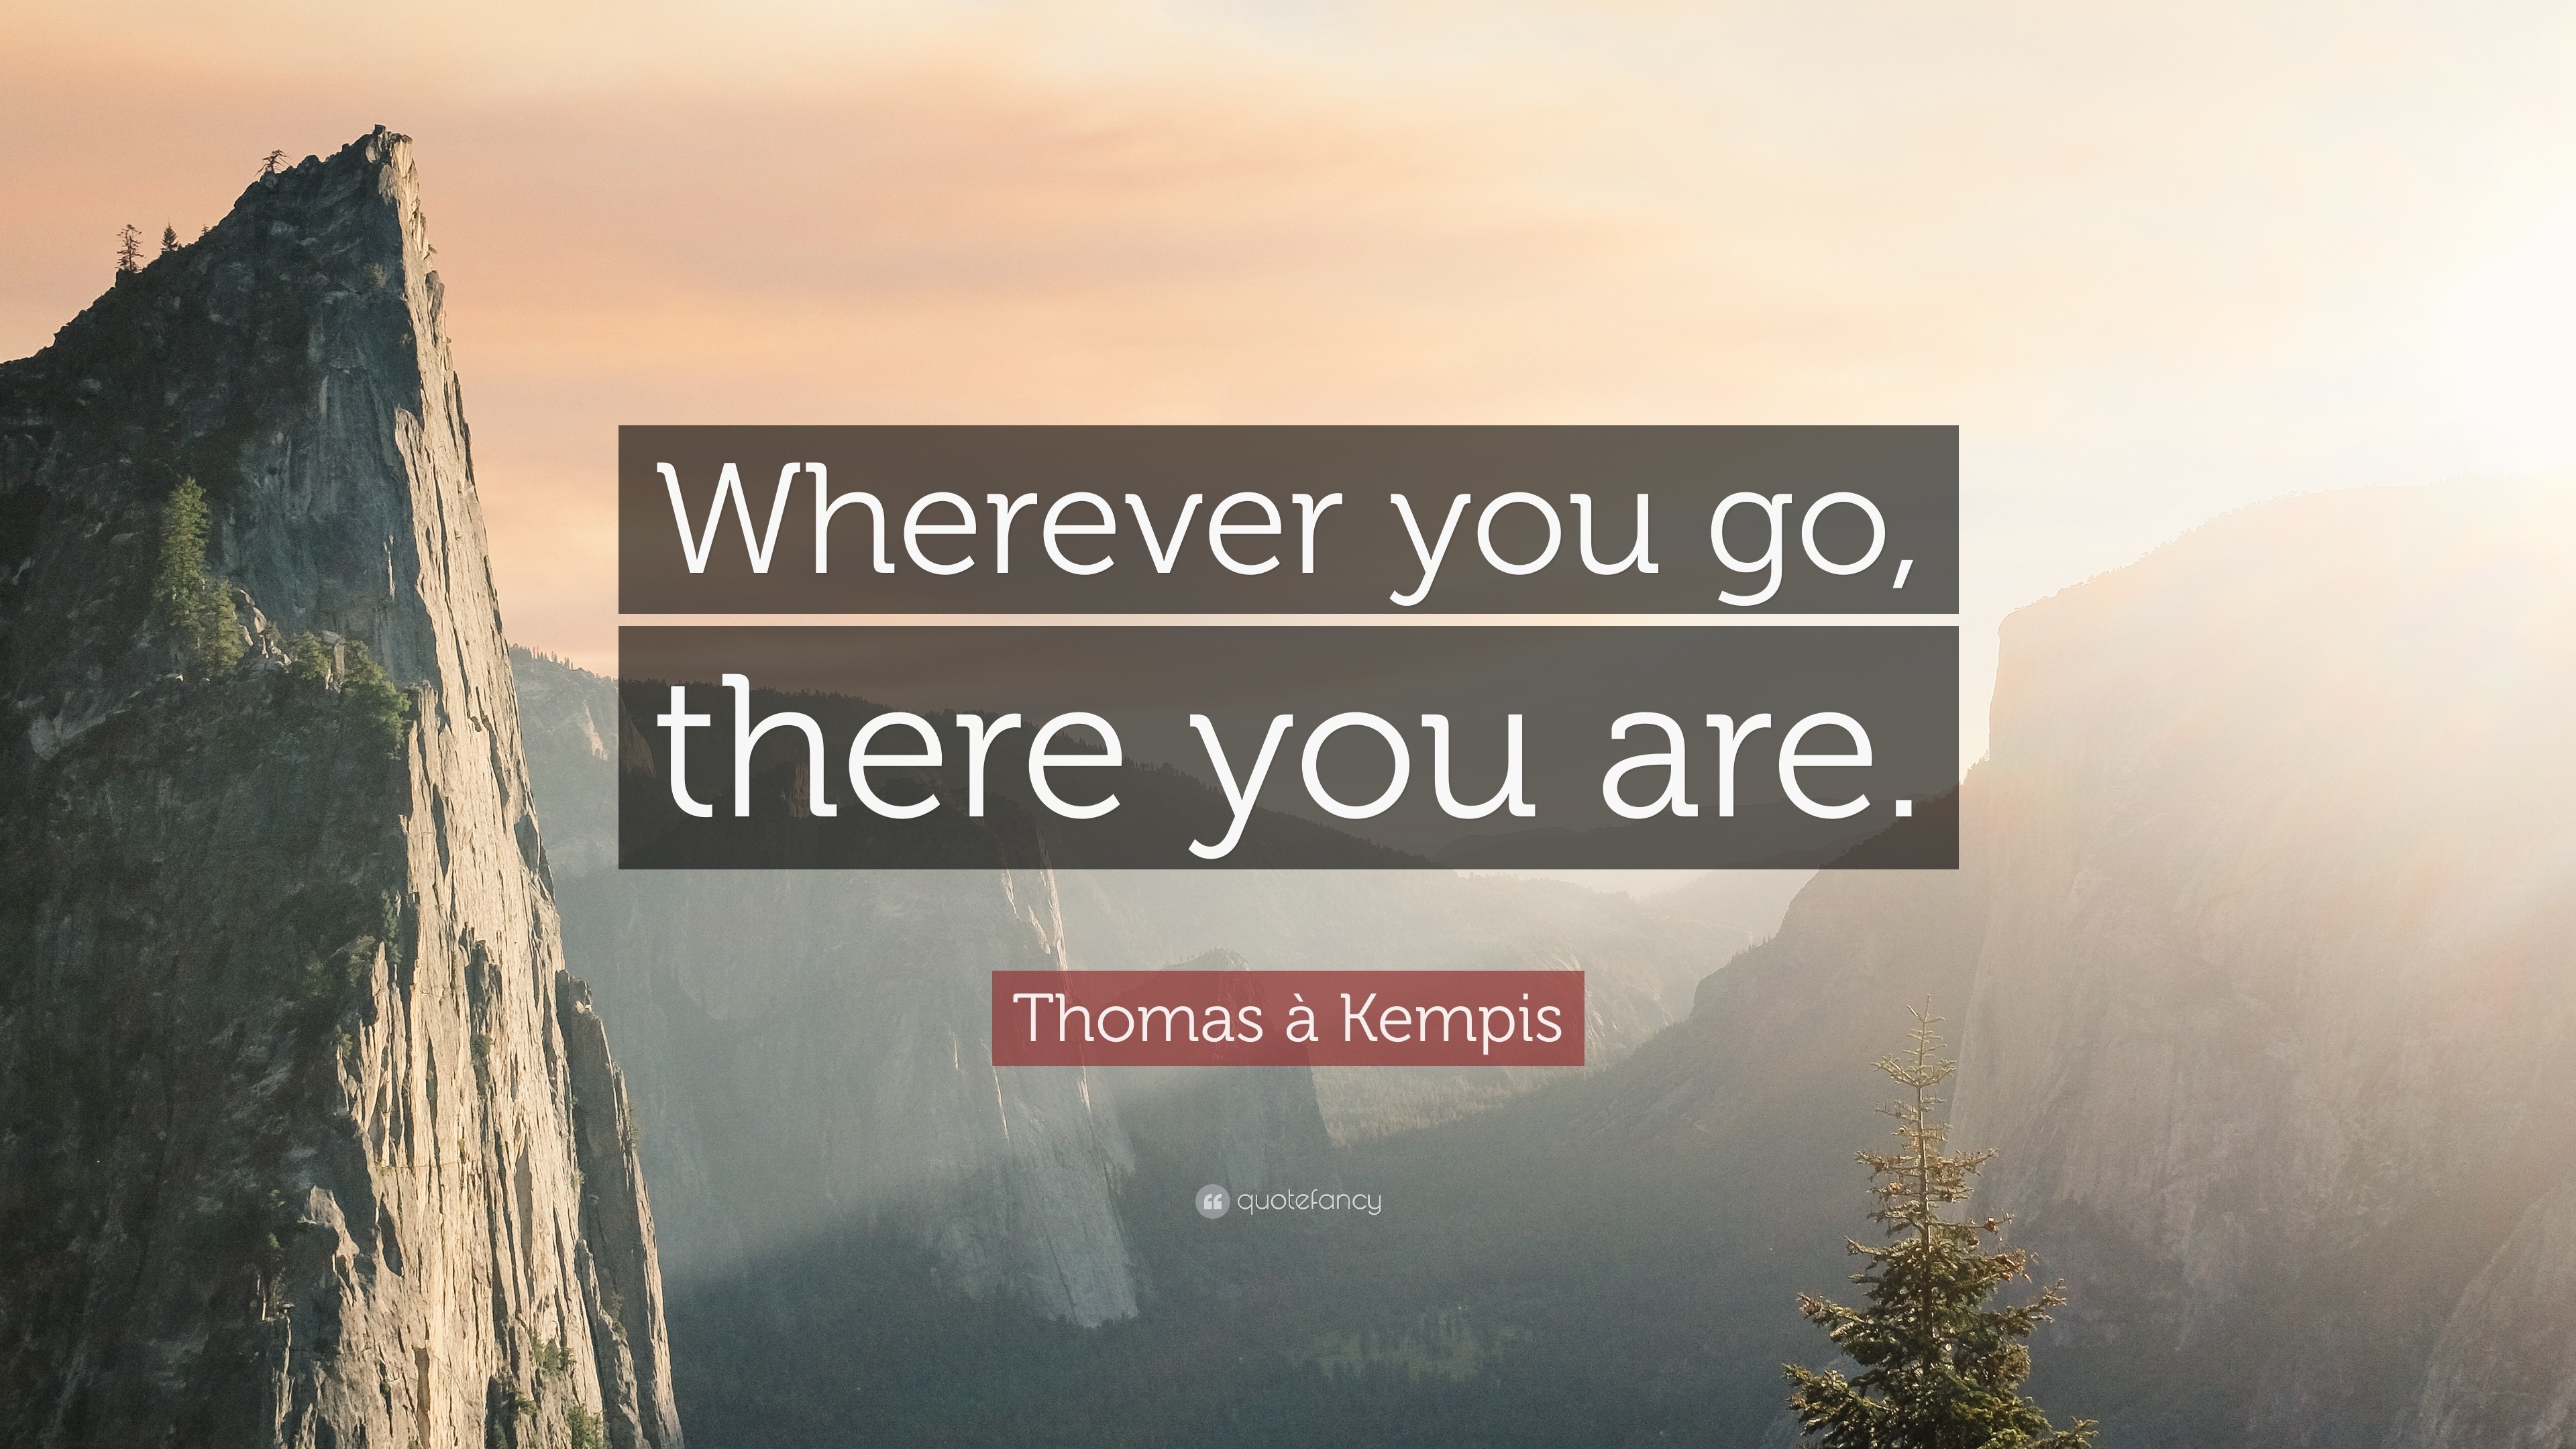 Thomas à Kempis Quote: “Wherever you go, there you are.” (7 ...